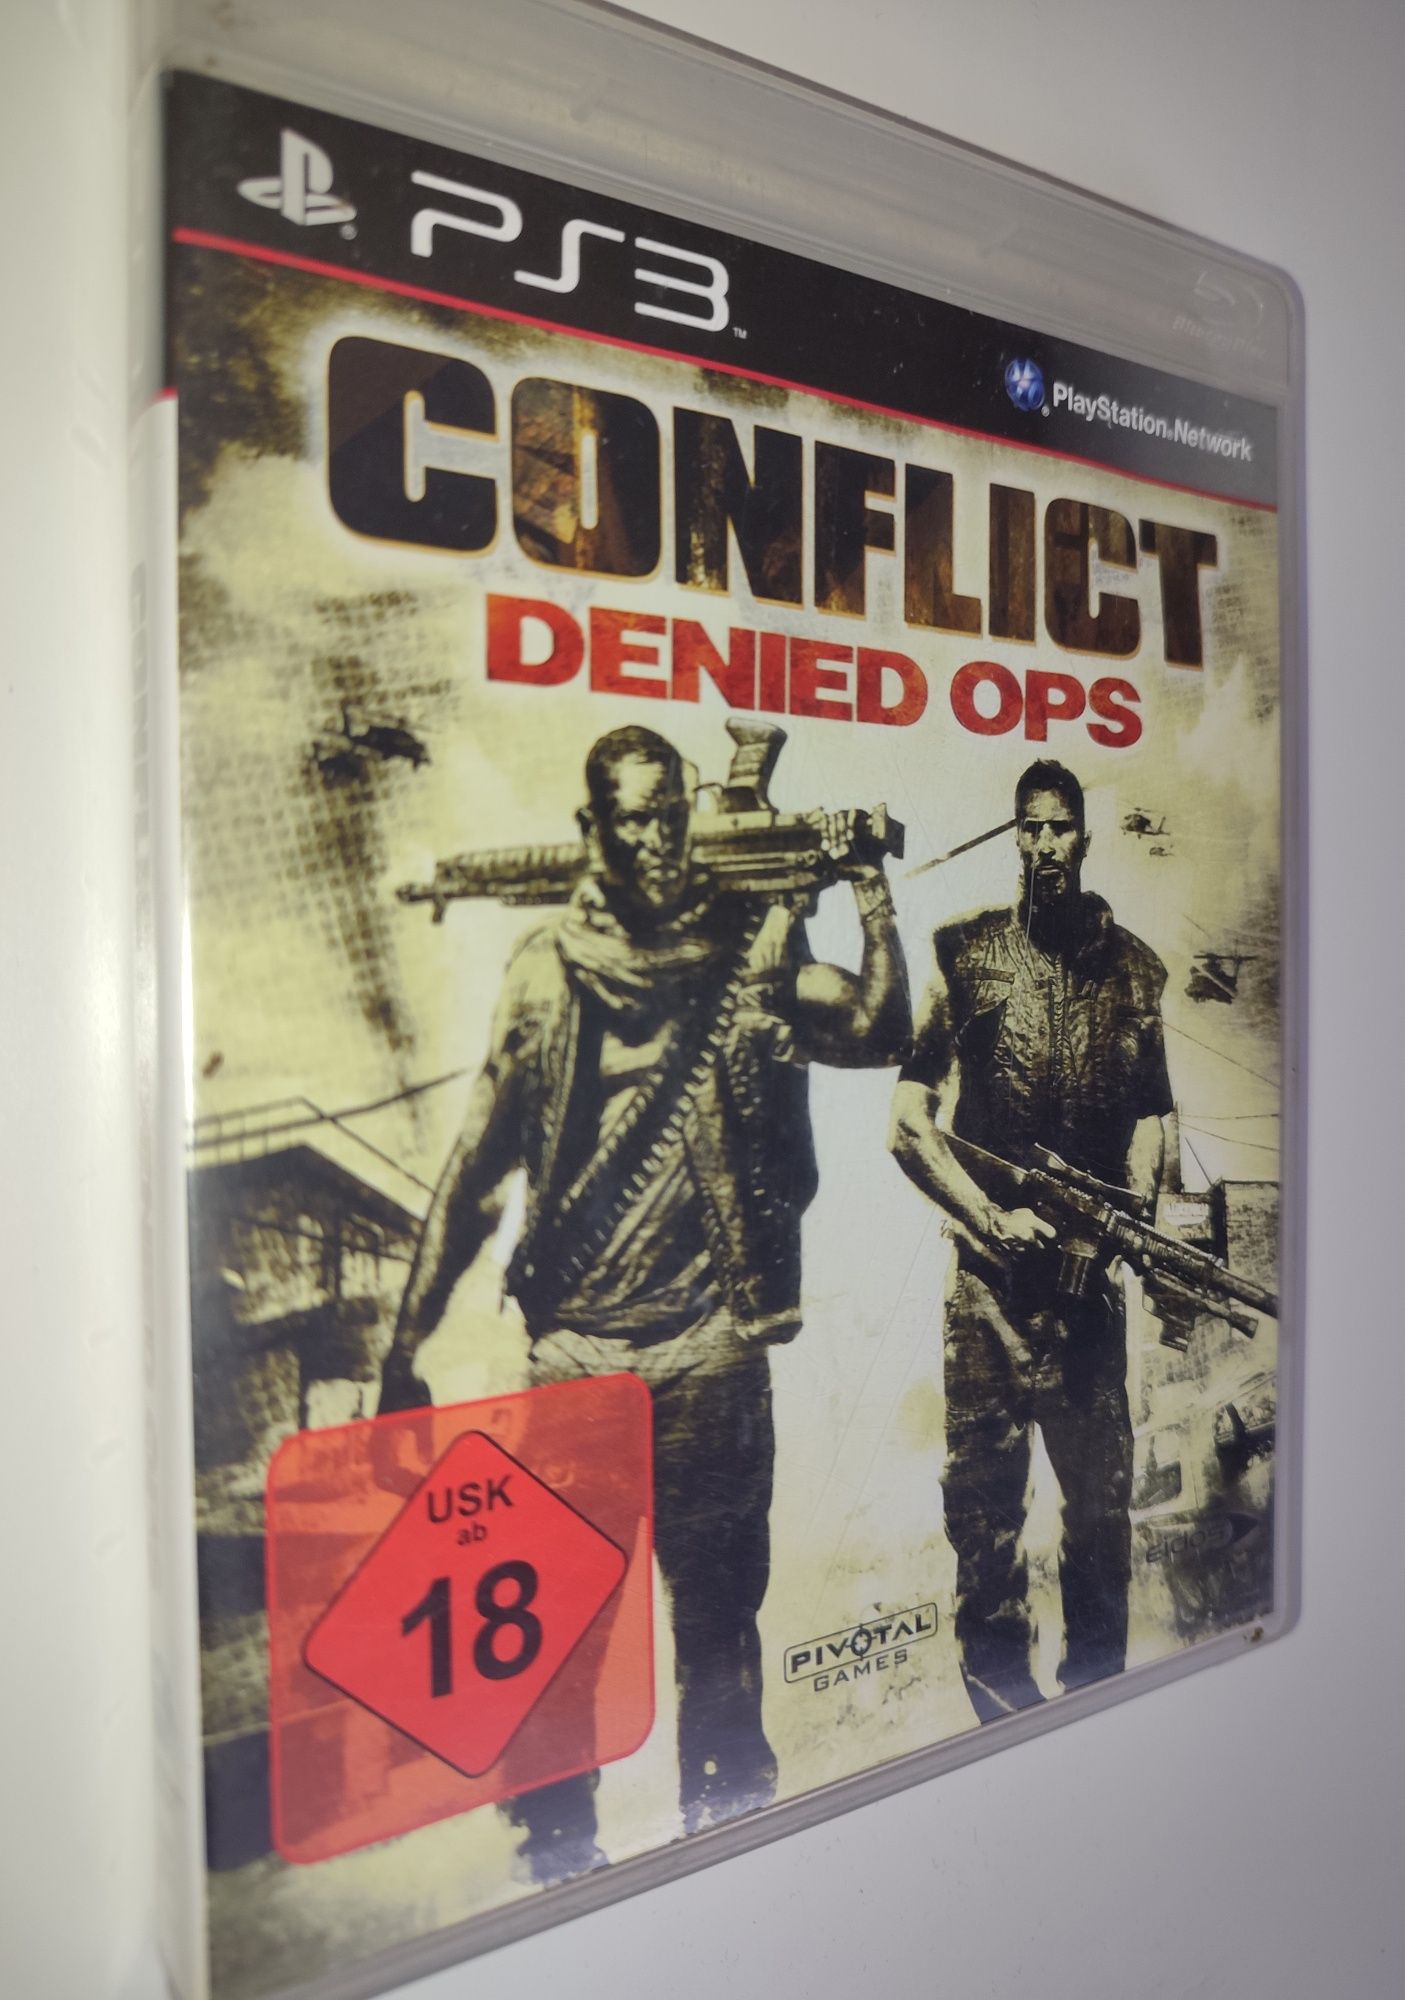 Gra Ps3 Conflict Denied Ops gry PlayStation 3 Hit Unikat